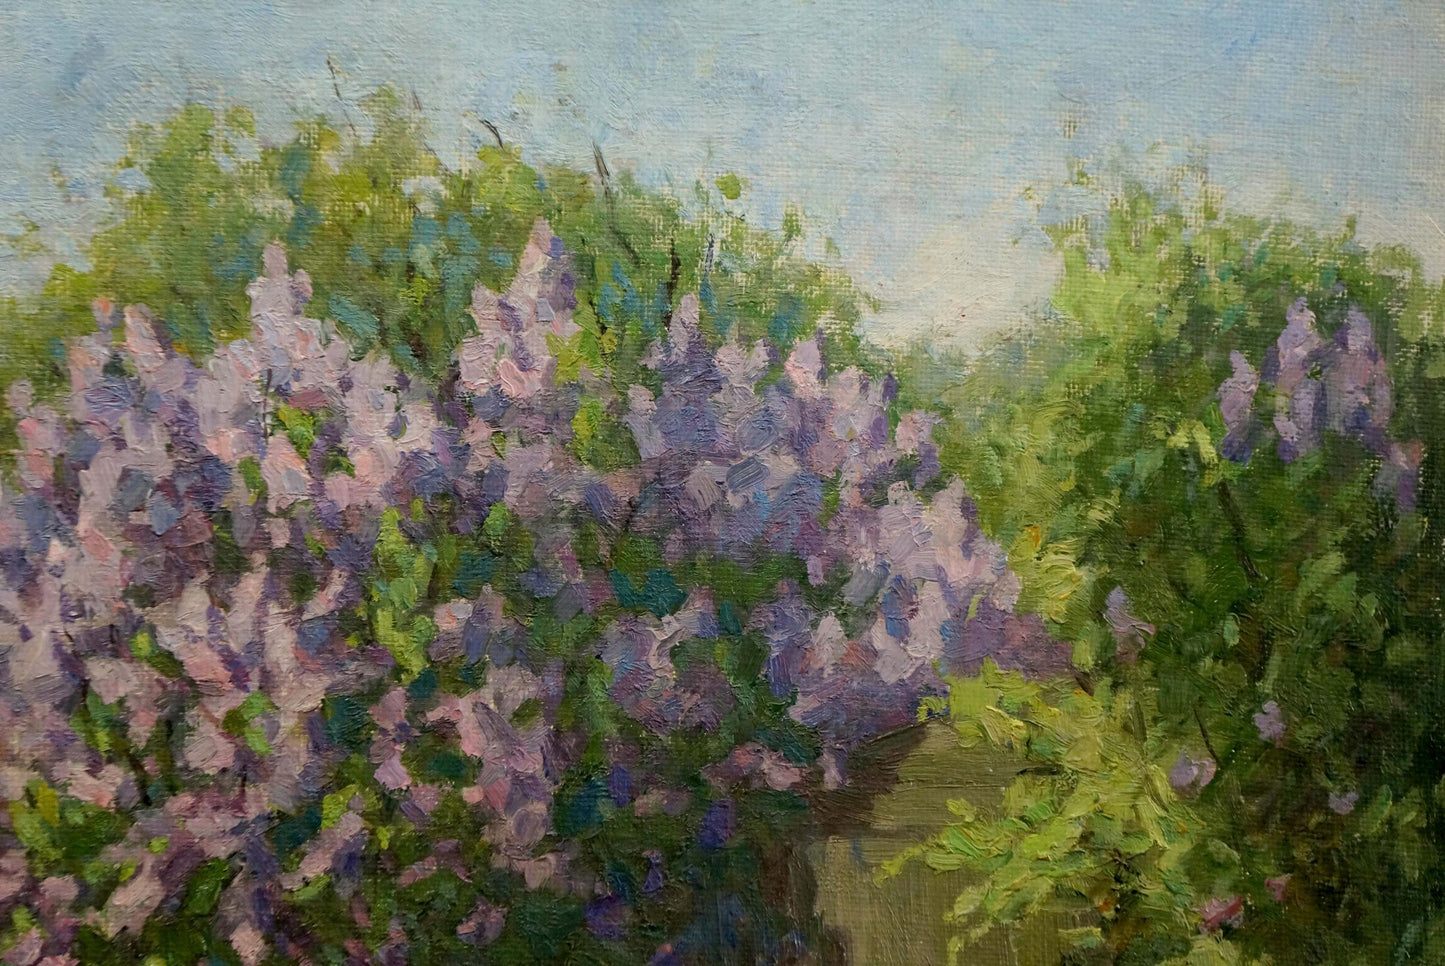 Oil painting Lilac blooms by the yard Fedorov Nikolay Alekseevich